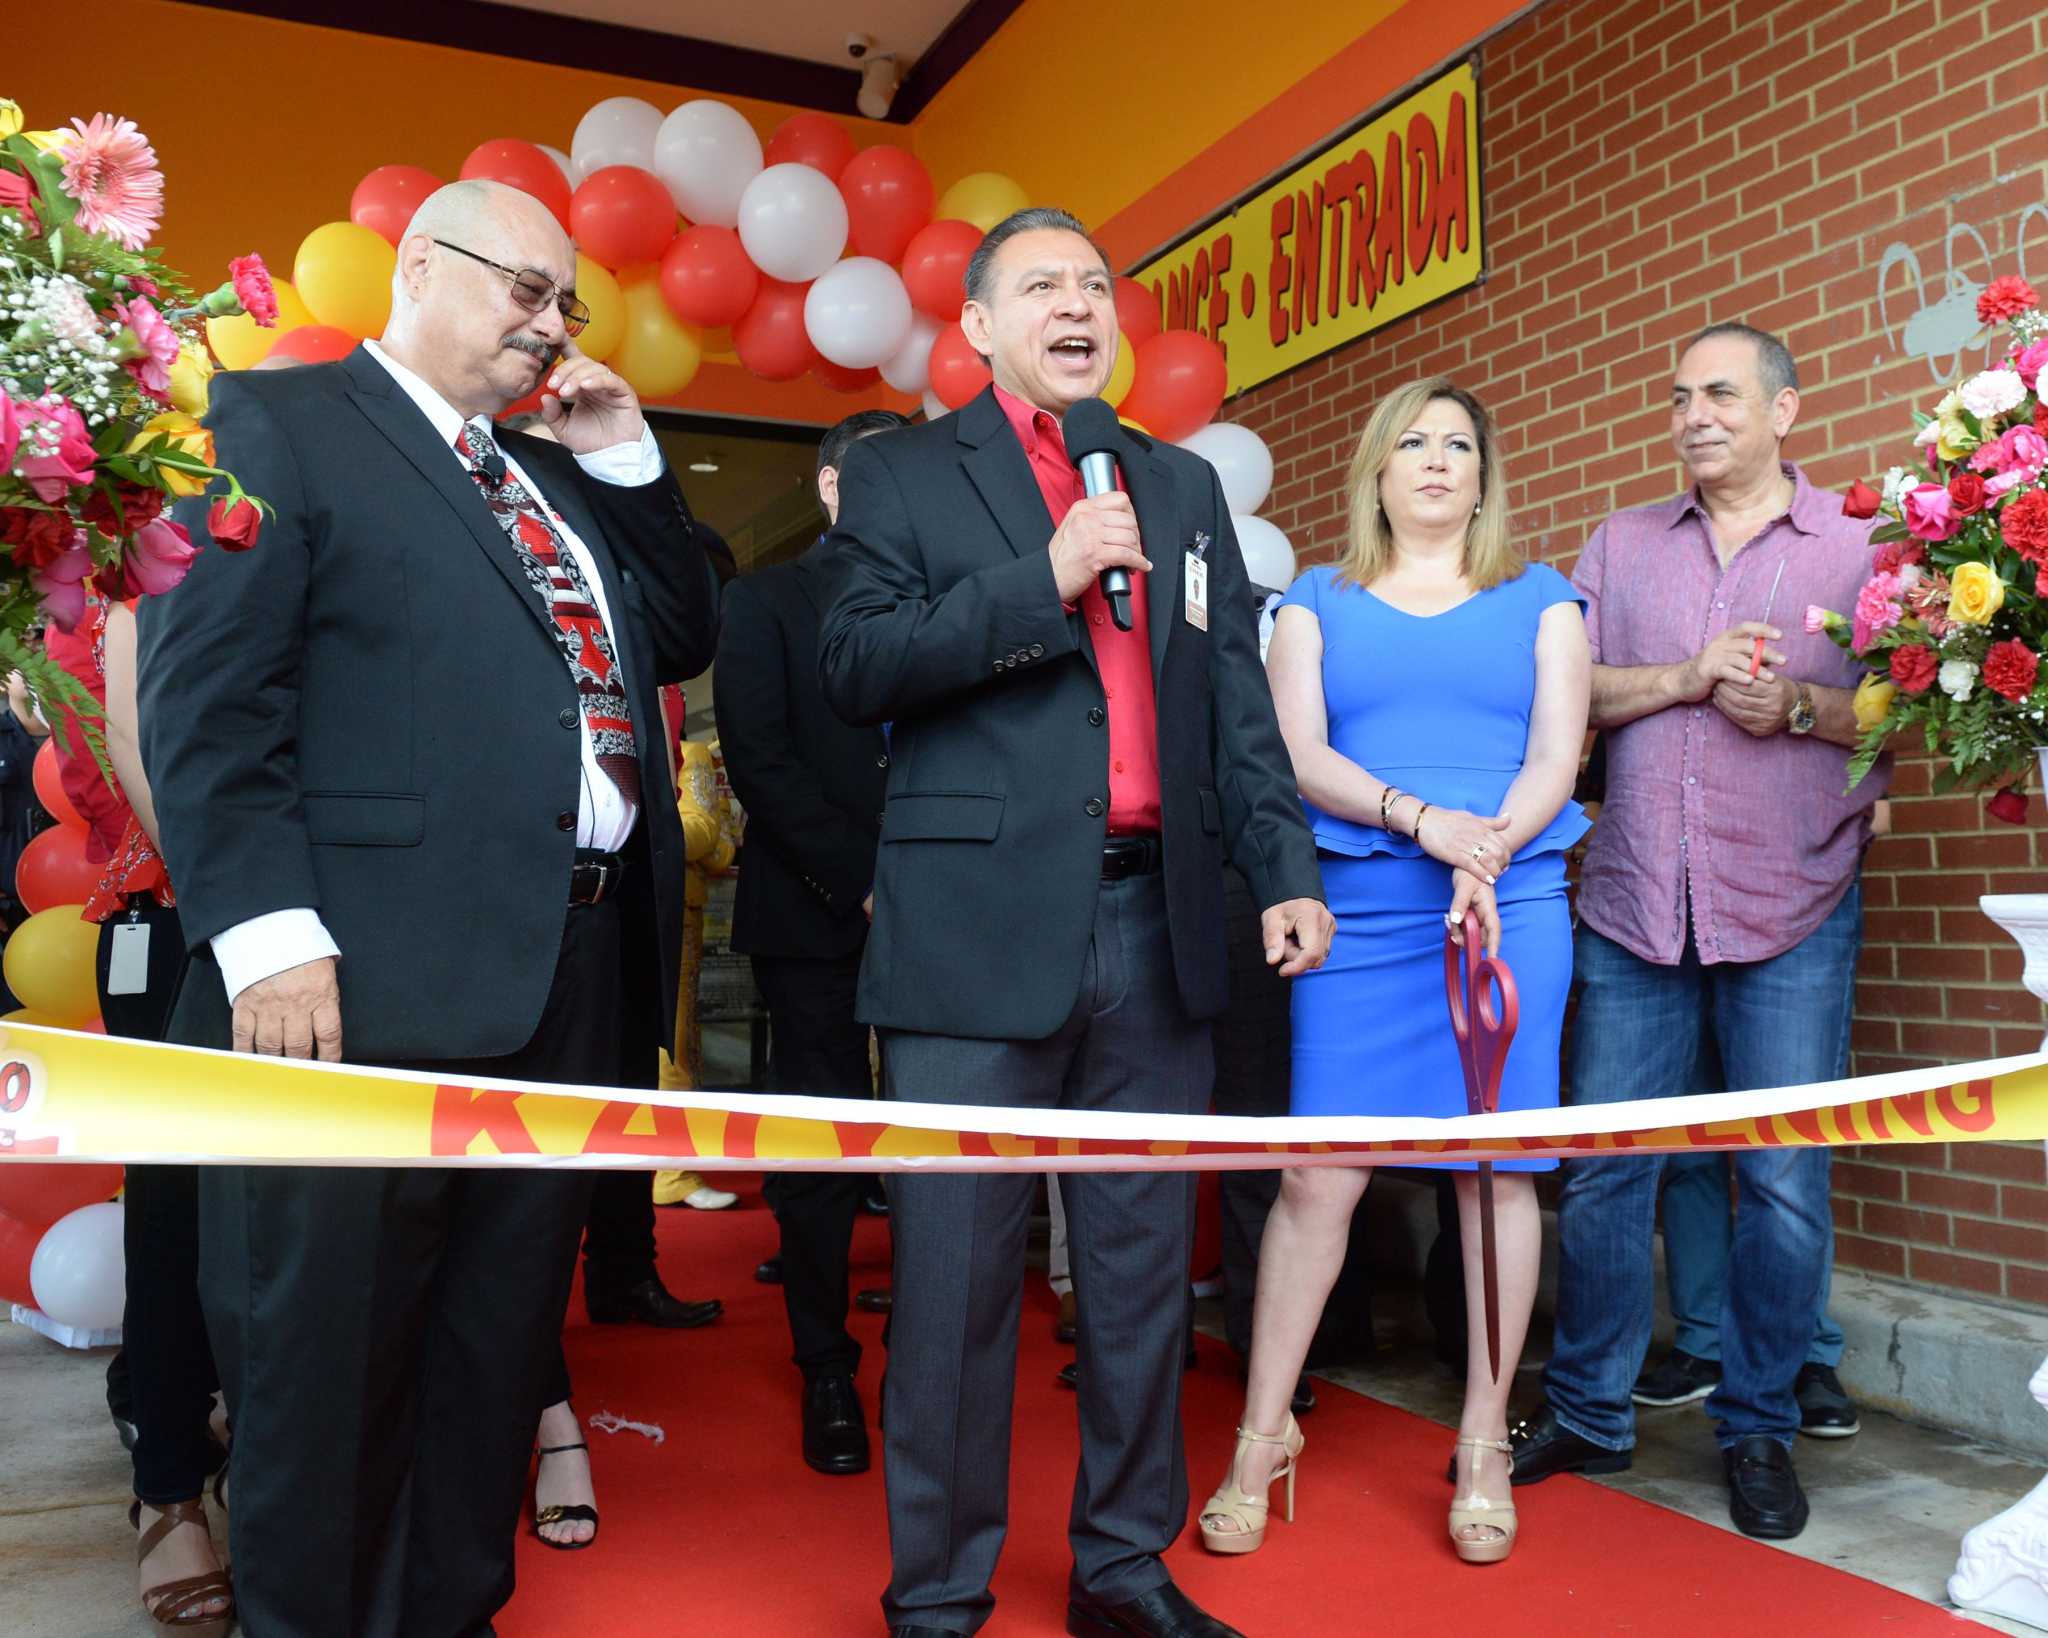 Katy turns out for warm welcome for El Rancho Supermercado